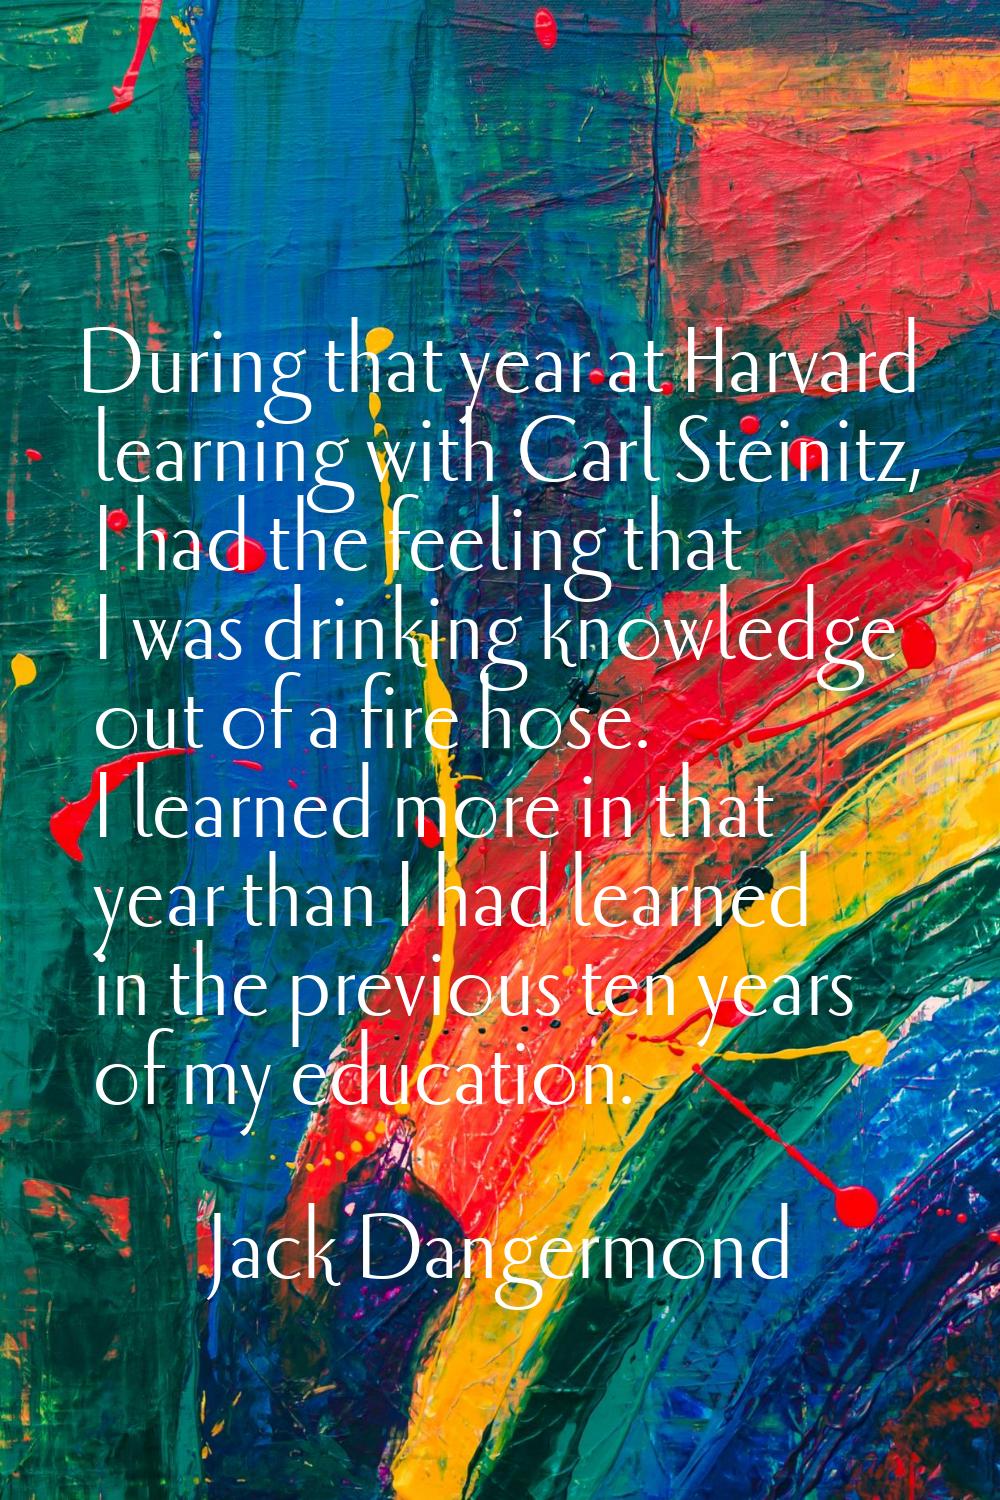 During that year at Harvard learning with Carl Steinitz, I had the feeling that I was drinking know